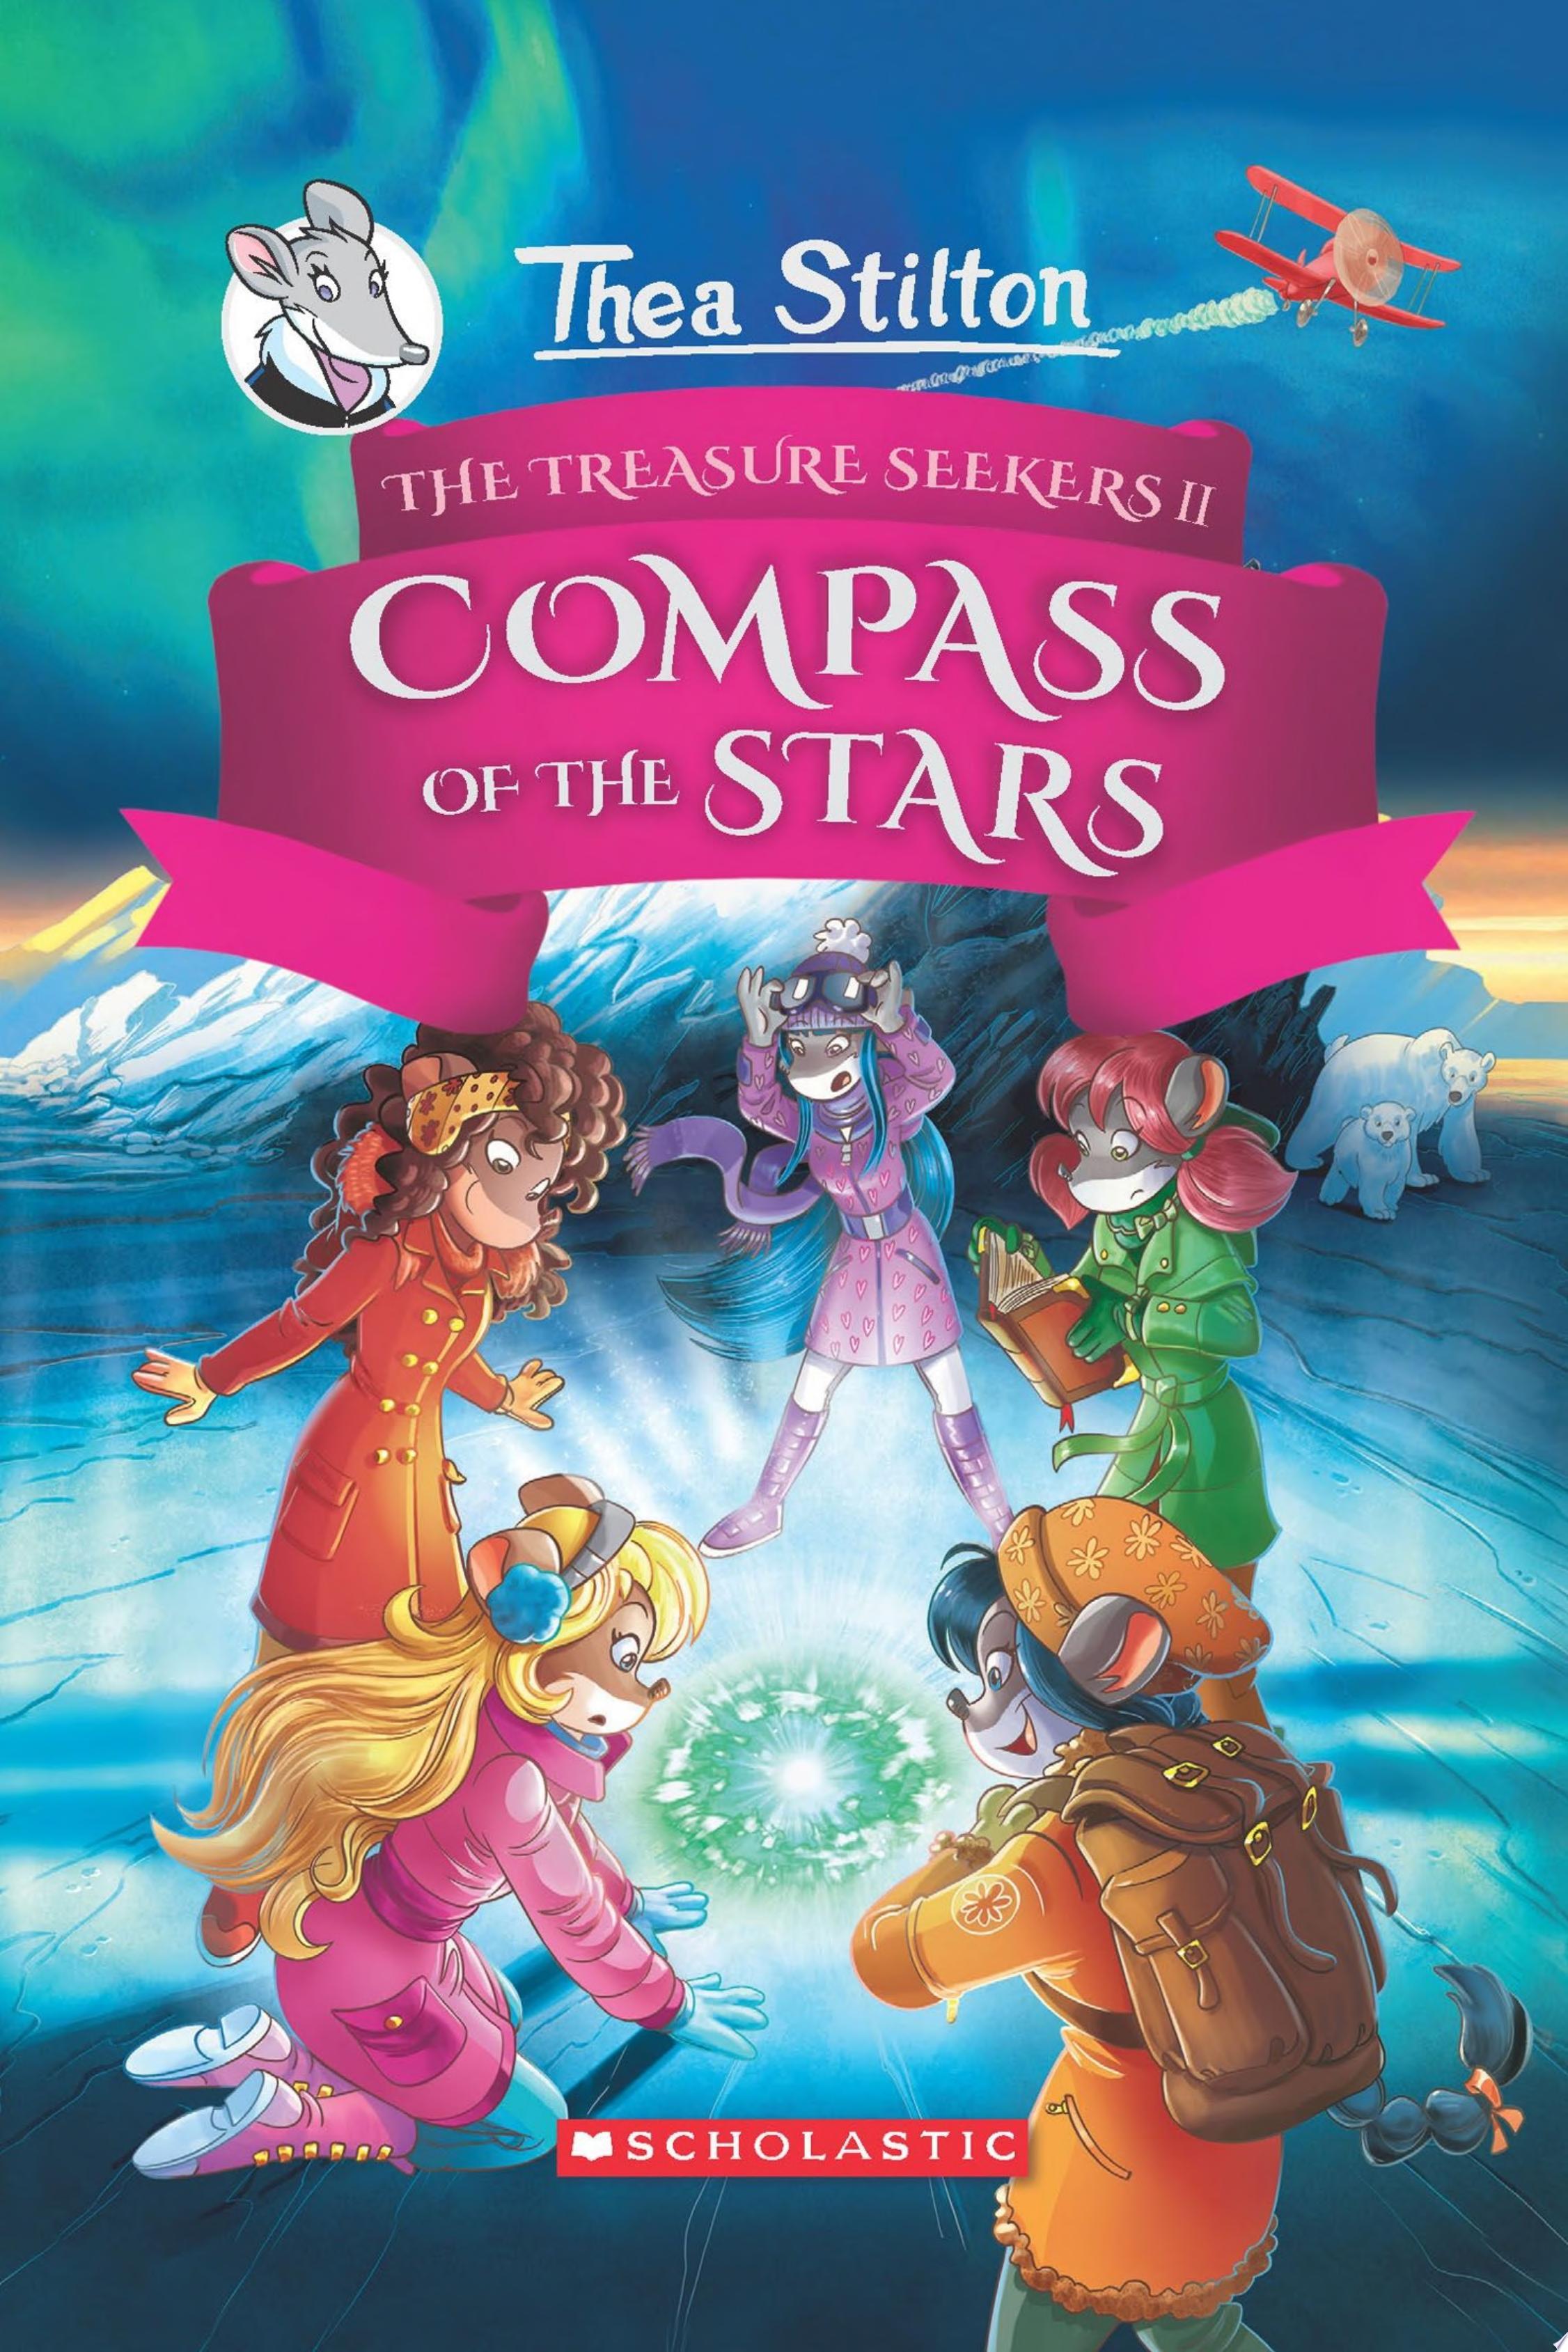 Image for "The Compass of the Stars (Thea Stilton and the Treasure Seekers #2)"